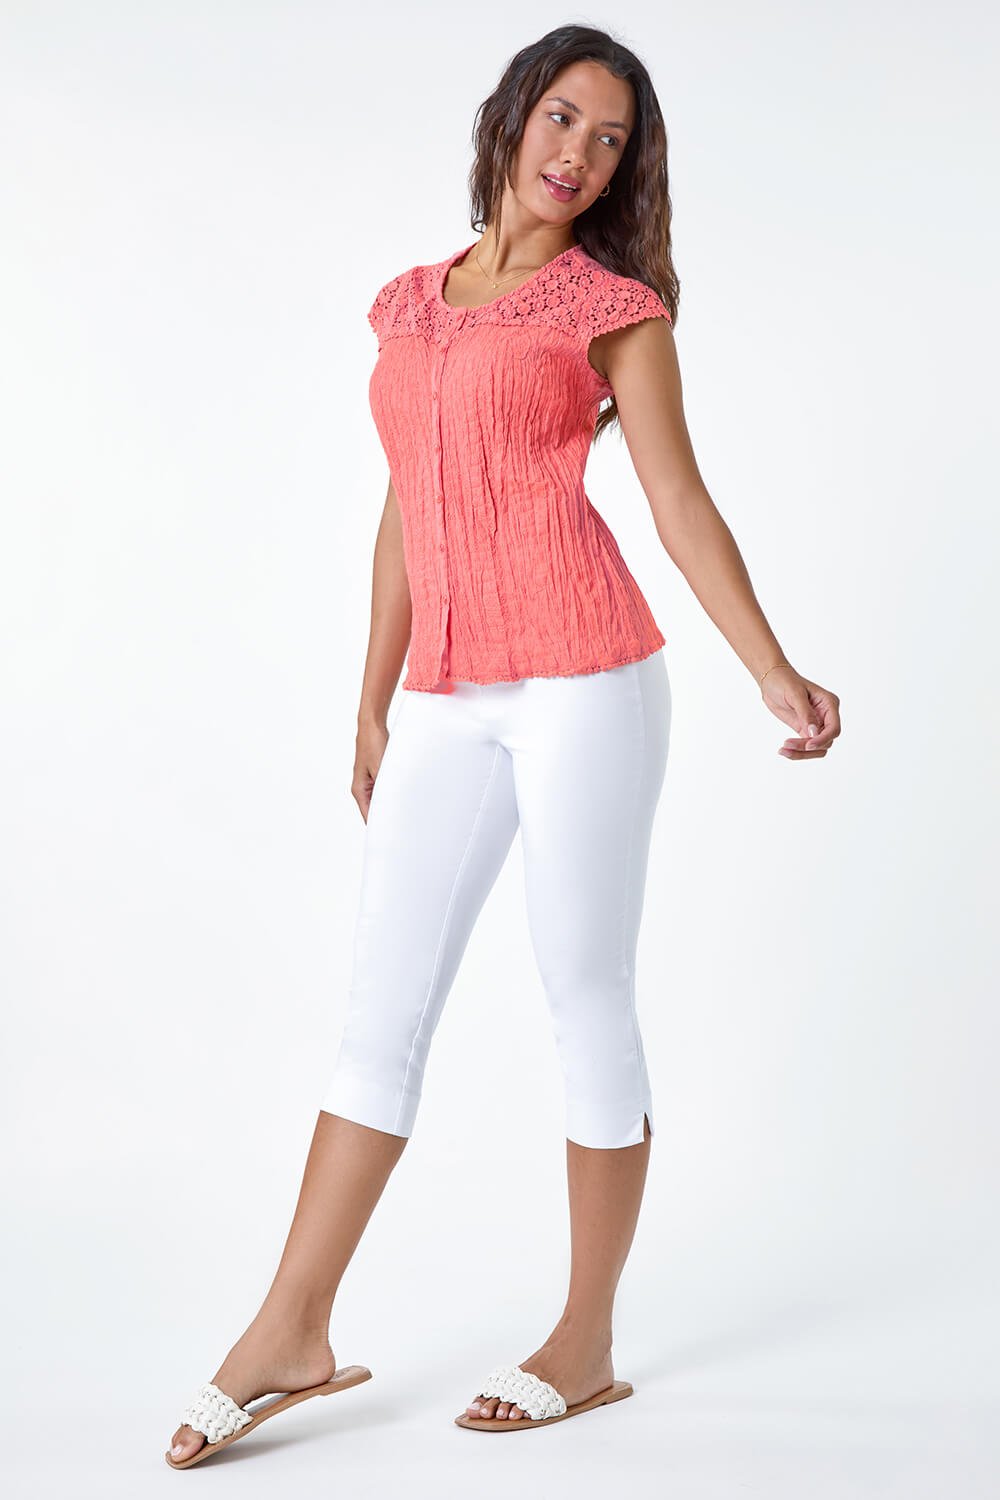 CORAL Lace Yoke and Sleeve Crinkle Blouse, Image 4 of 5